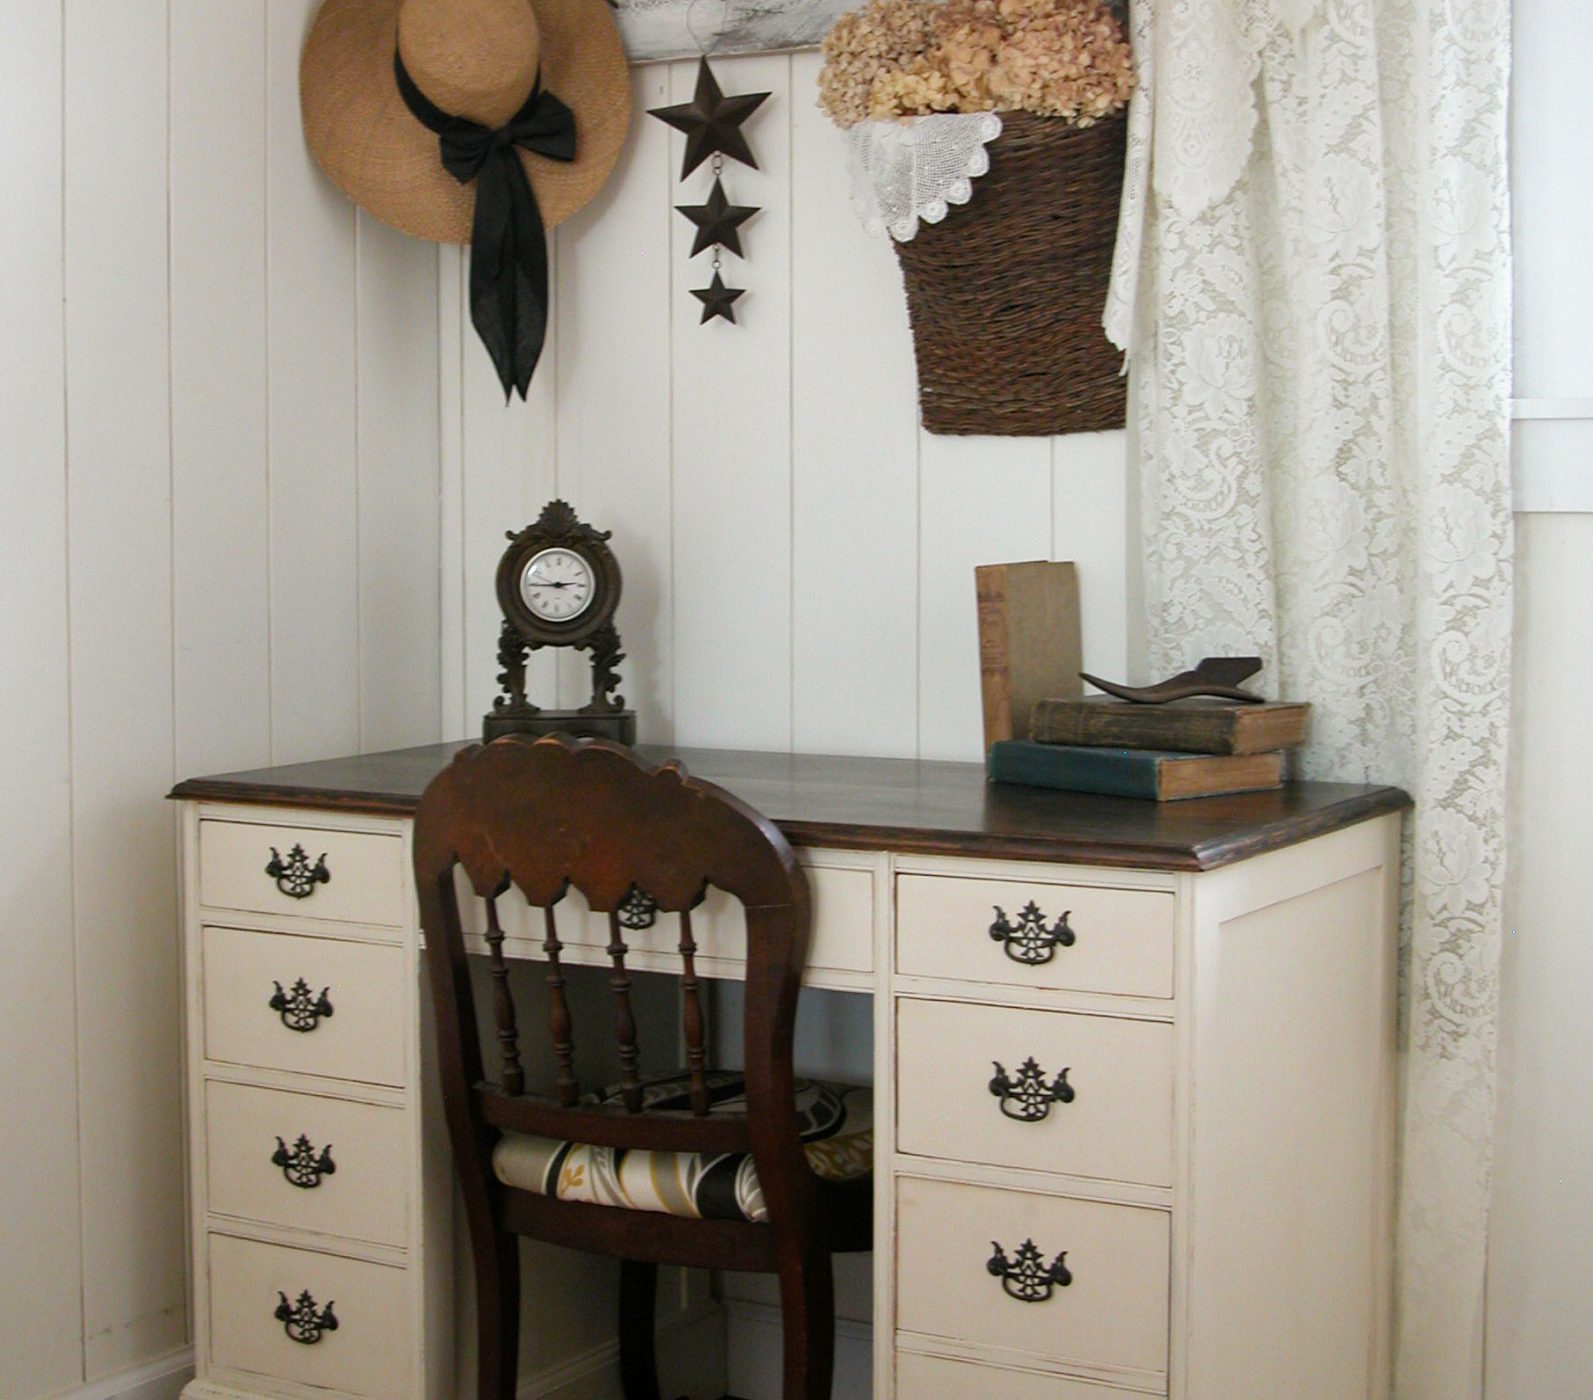 Vintage Desk Restored by Teen Boy Featured by Prodigal Pieces | www.prodigalpieces.com